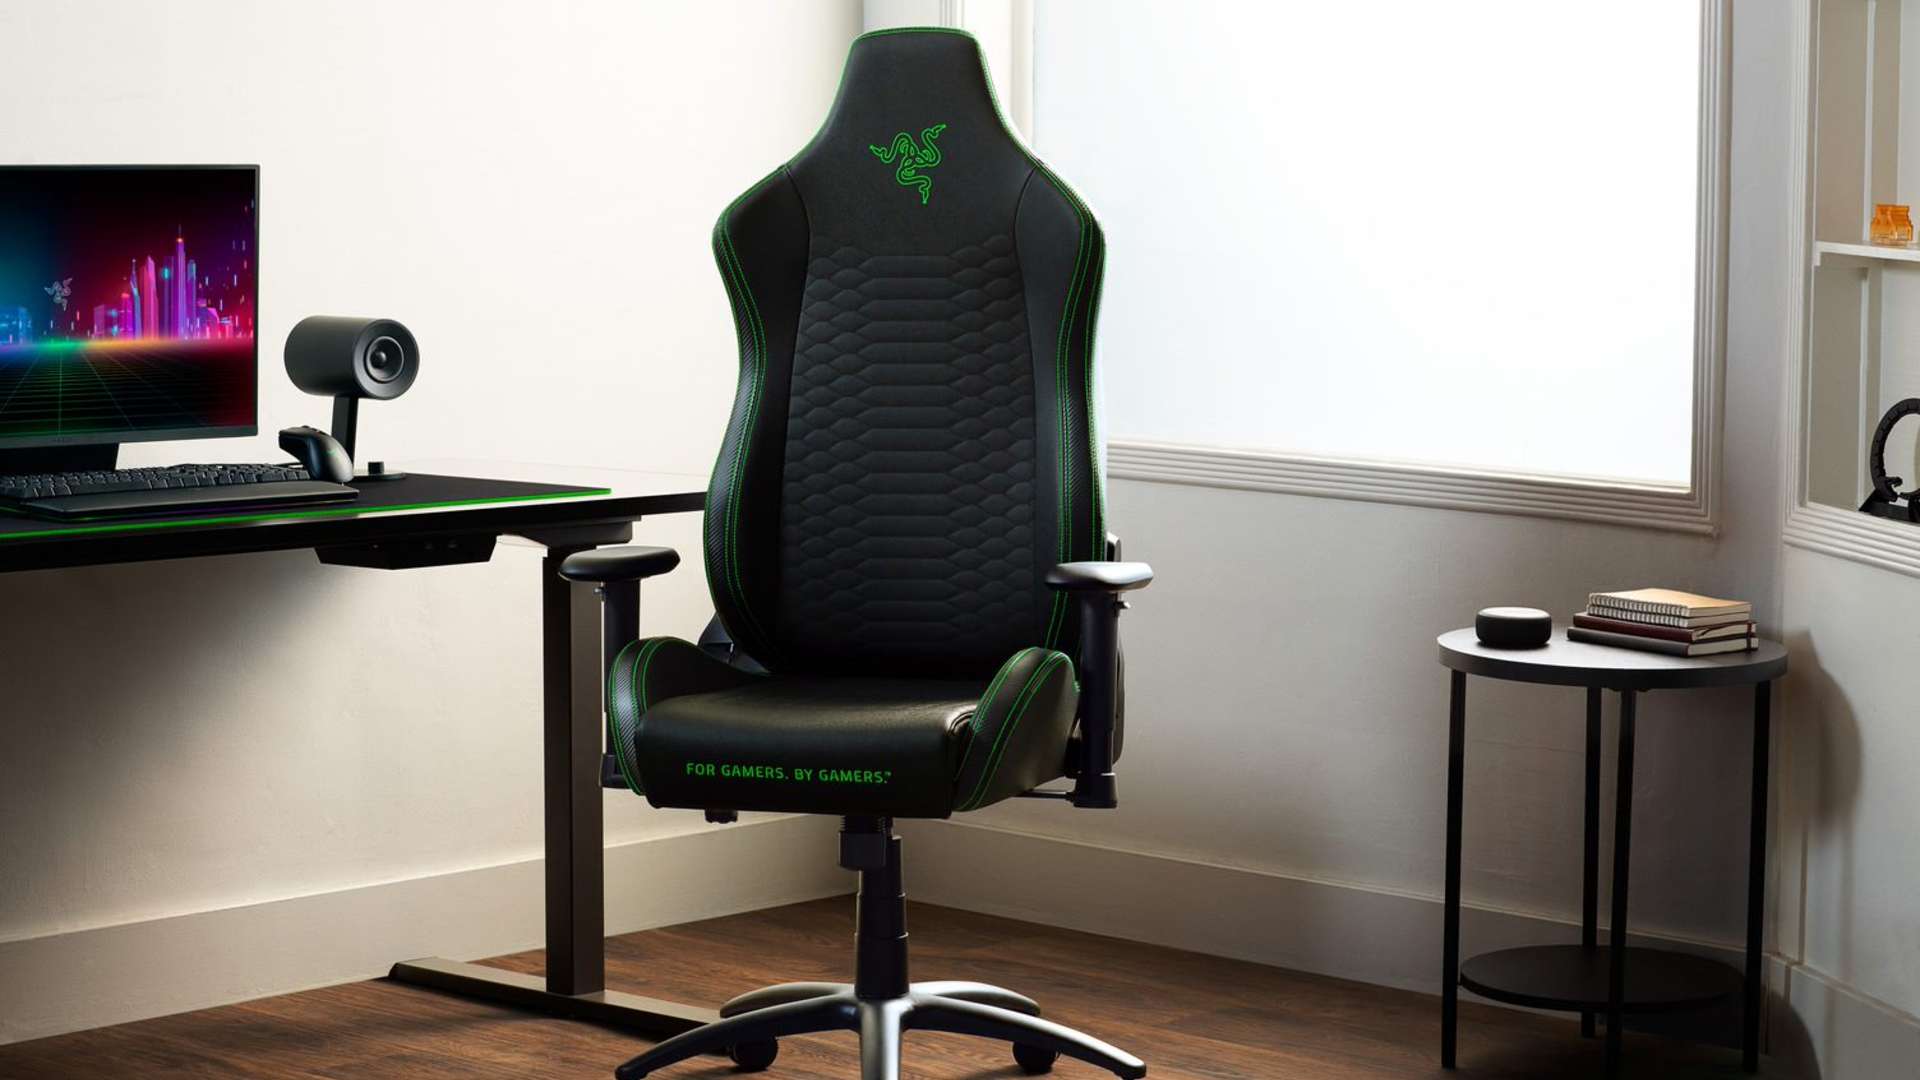 New Razer gaming chair is cheaper and named after its gaming headsets